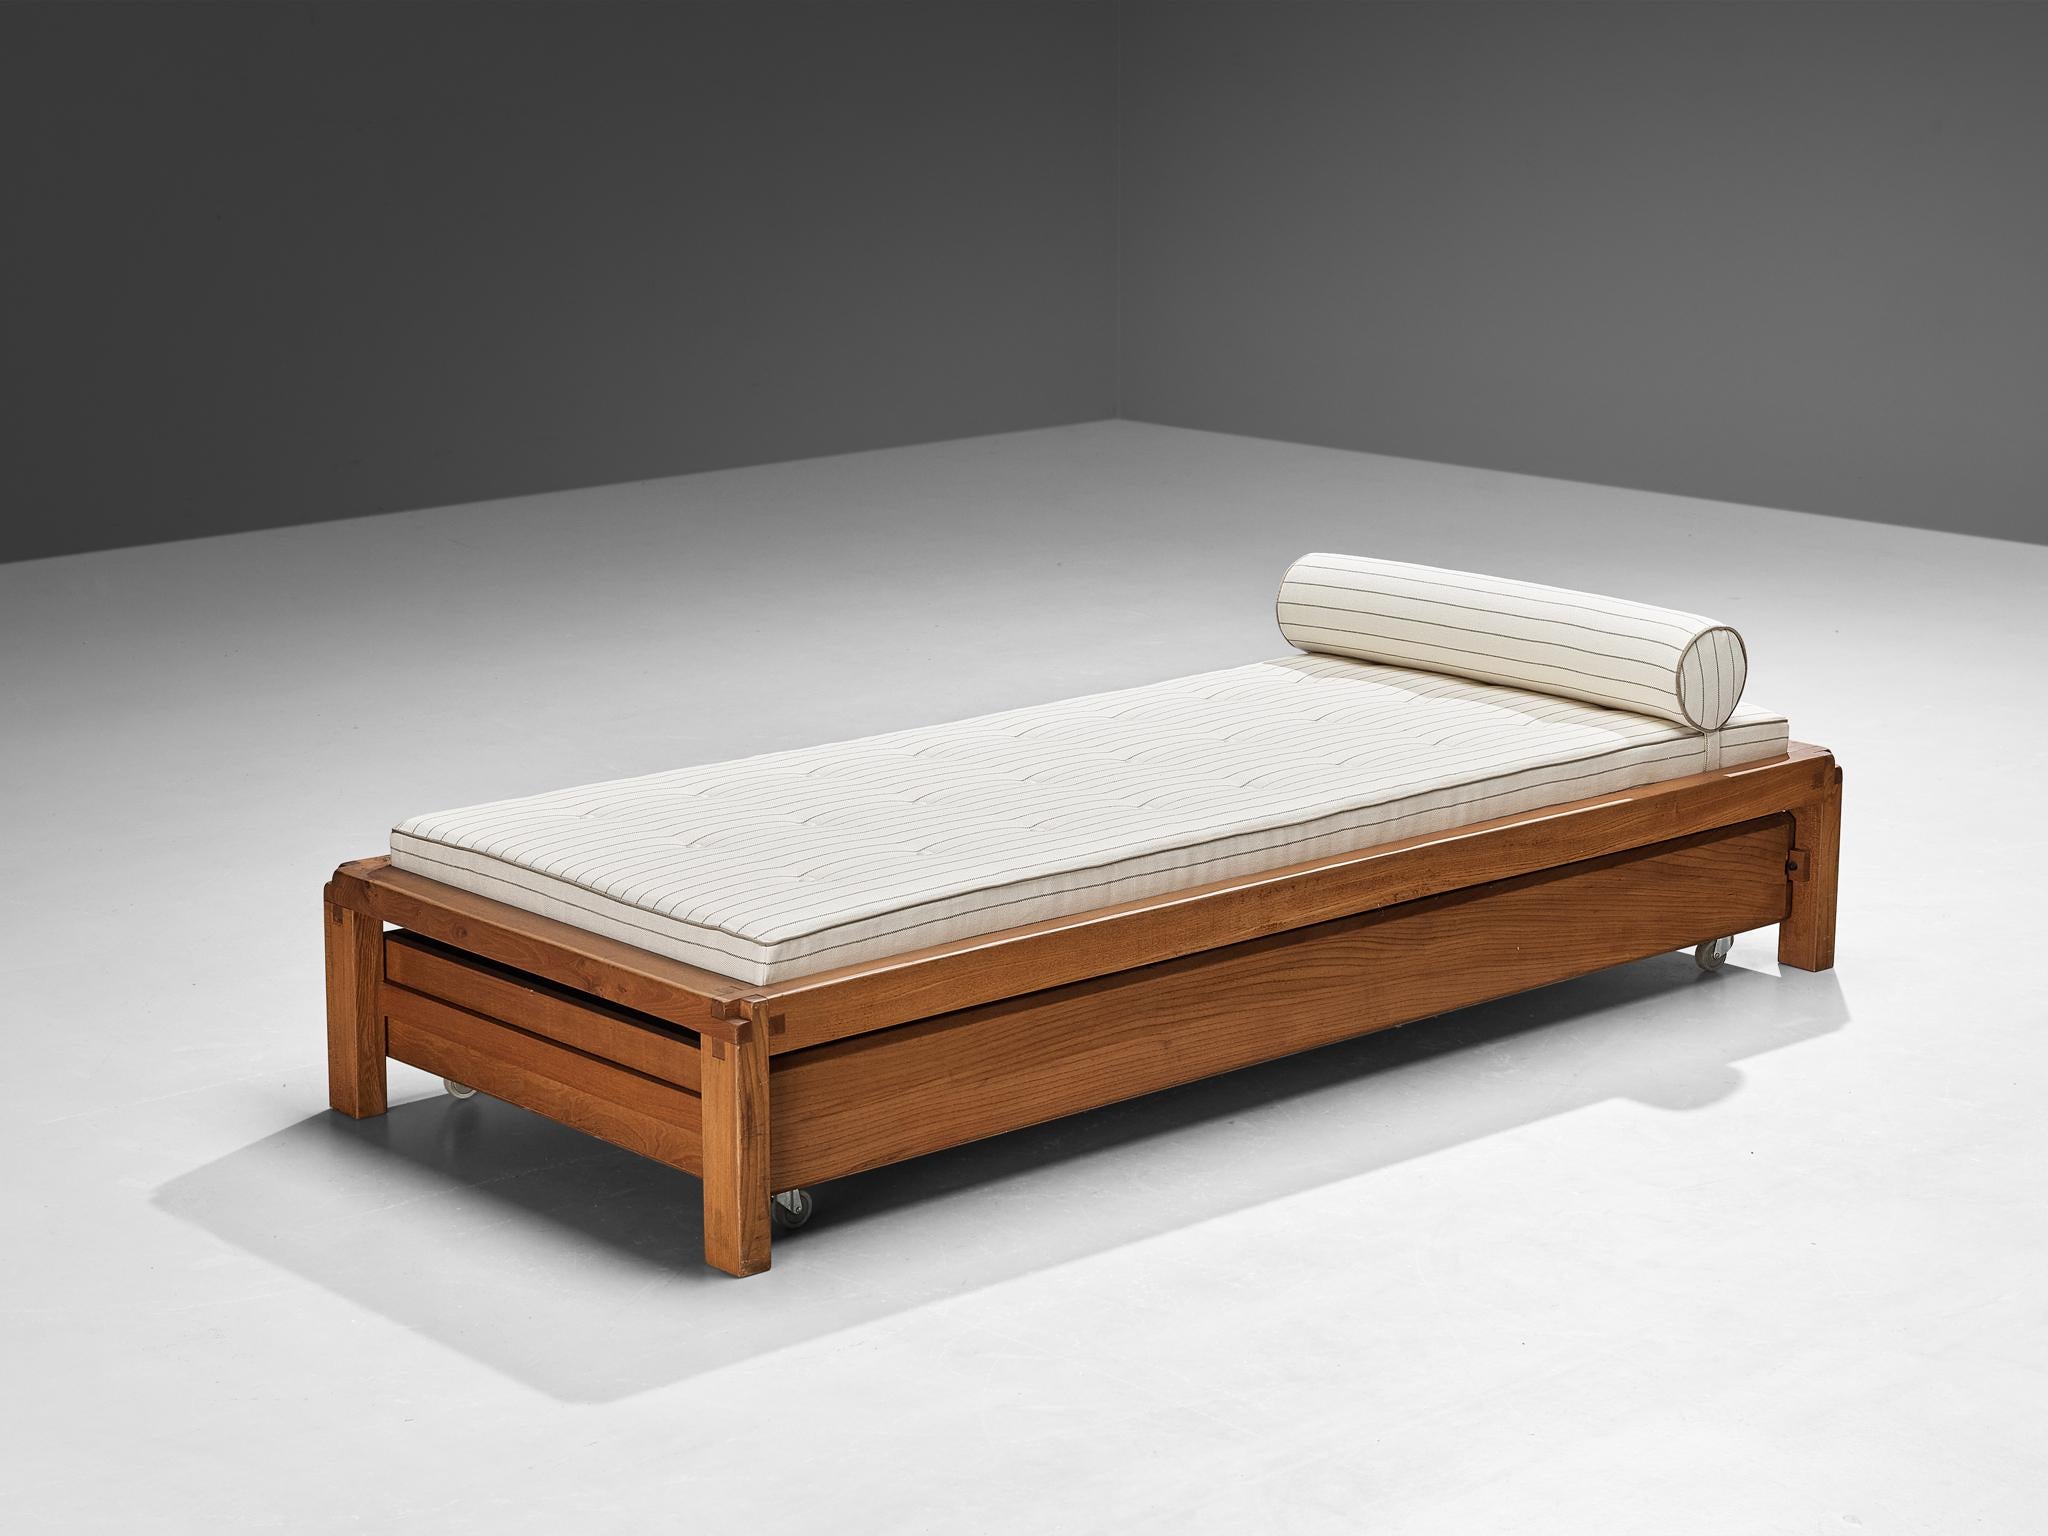 Pierre Chapo, daybed with drawer model 'L03', France, circa 1965. 

This design is an early edition, created according to the original craft methodology of Pierre Chapo. The bed has storage underneath in the shape of a large drawer with wheels. The